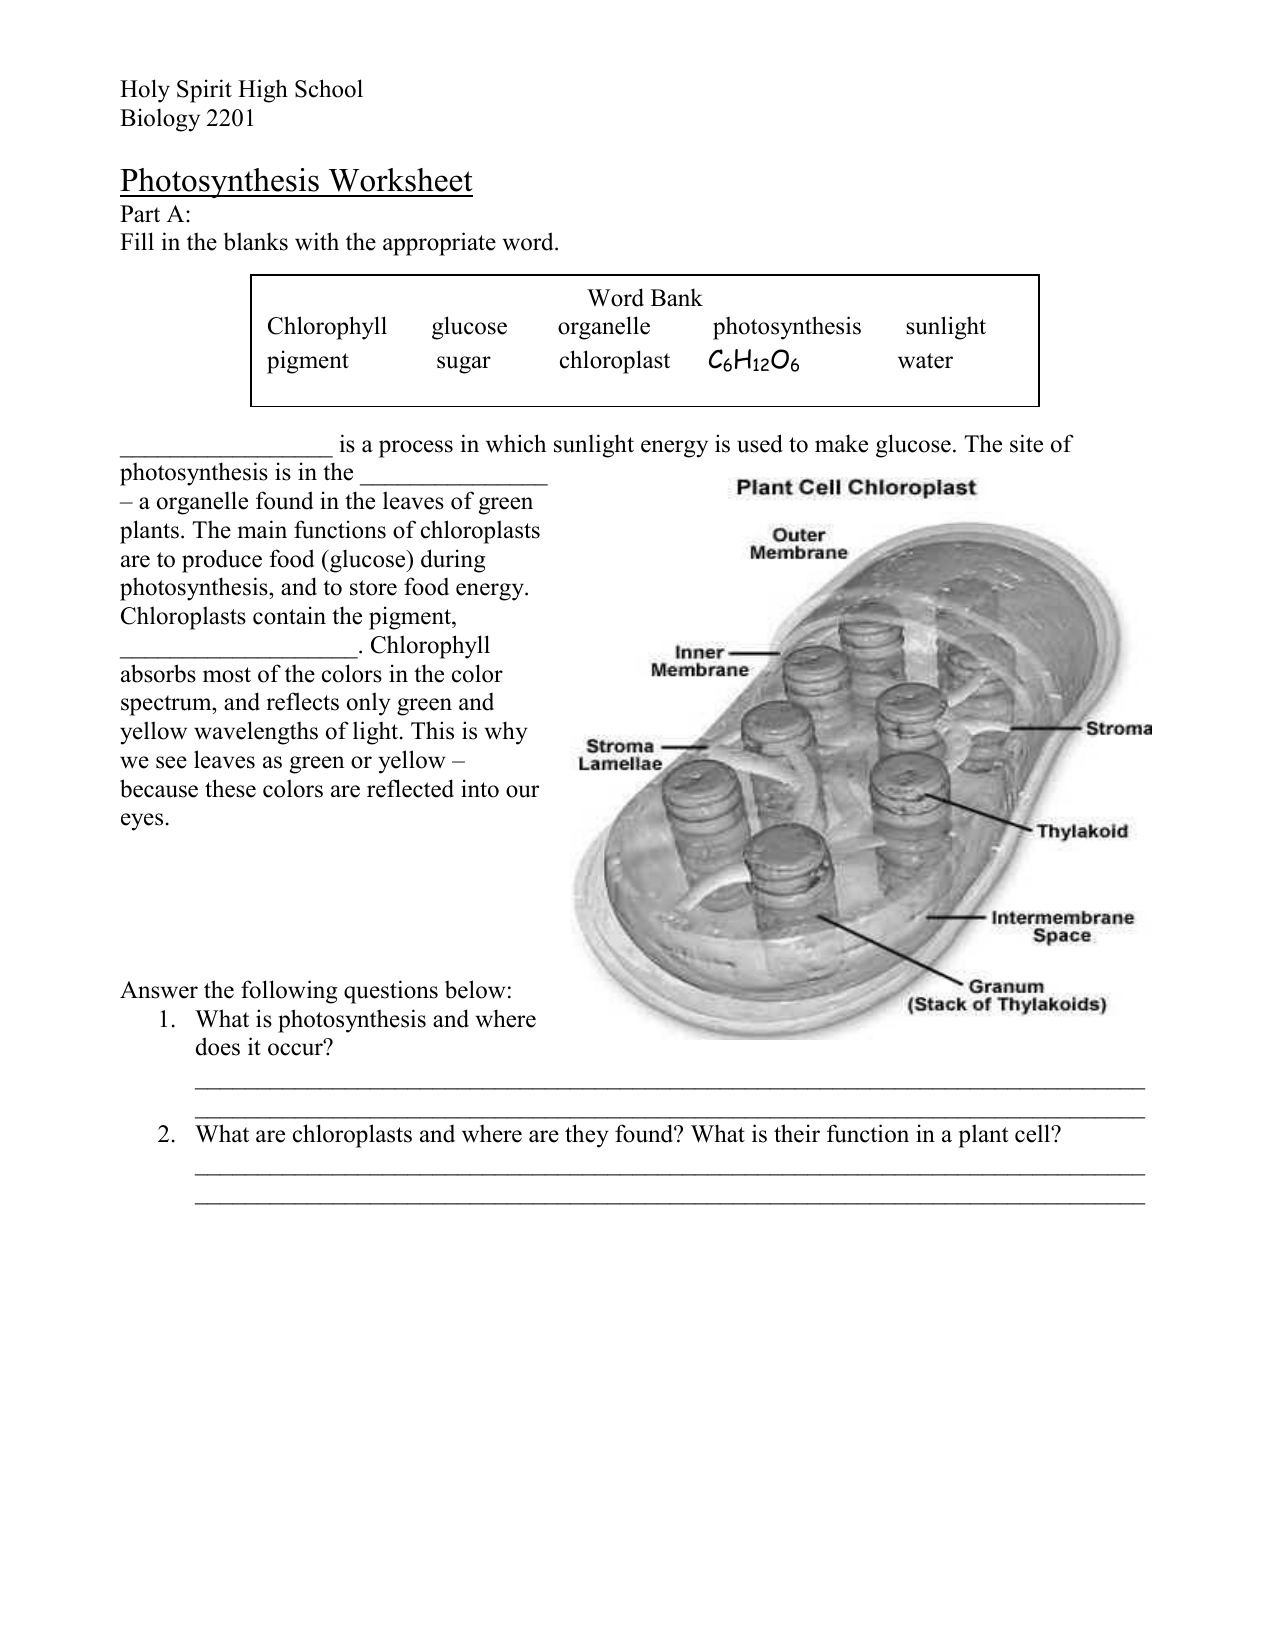 Photosynthesis Worksheets Biology